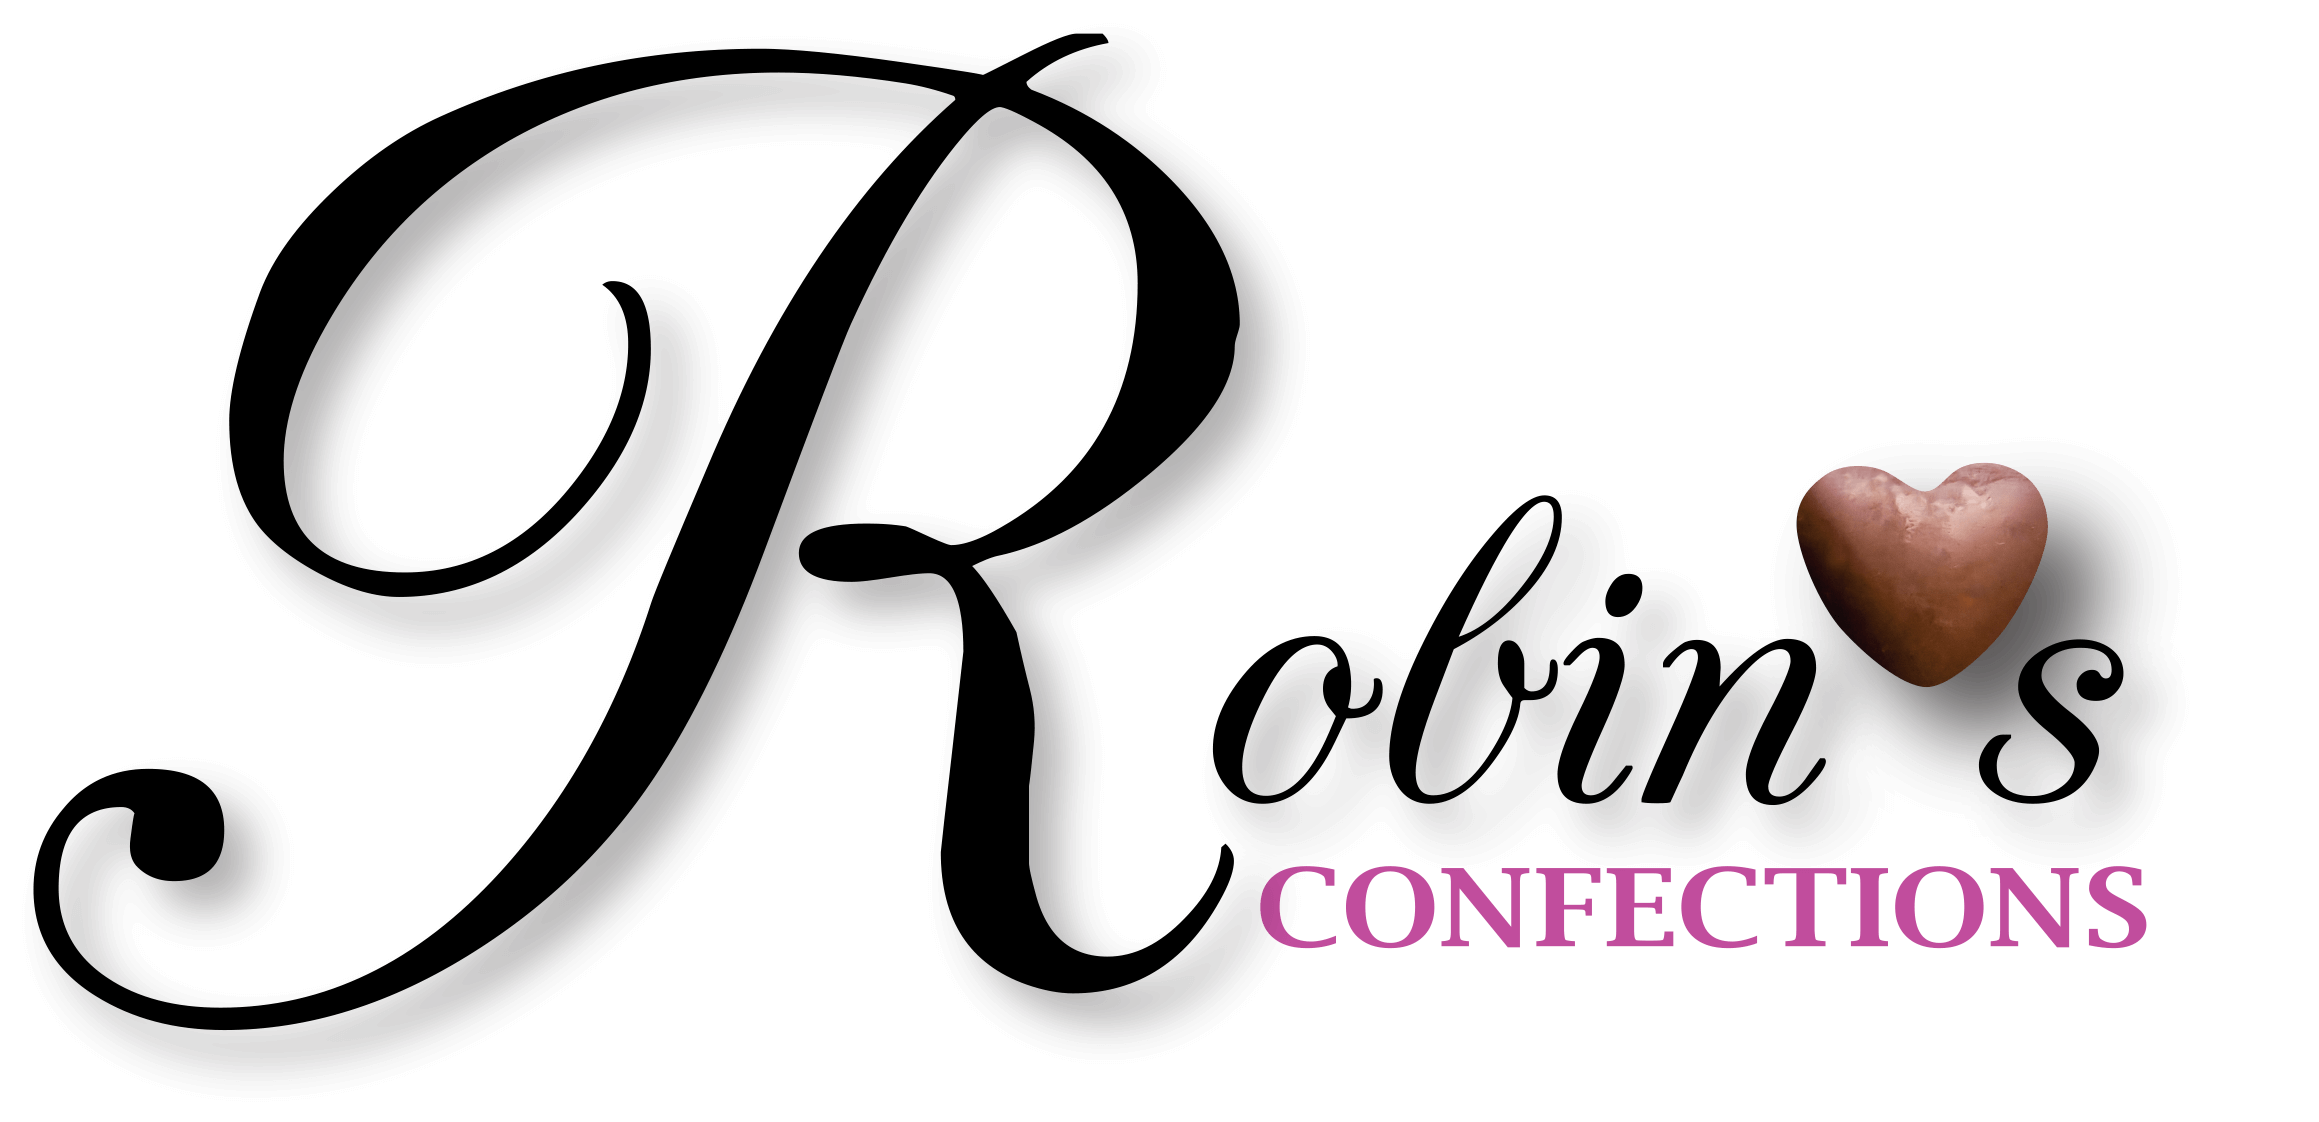 Robin's Confections